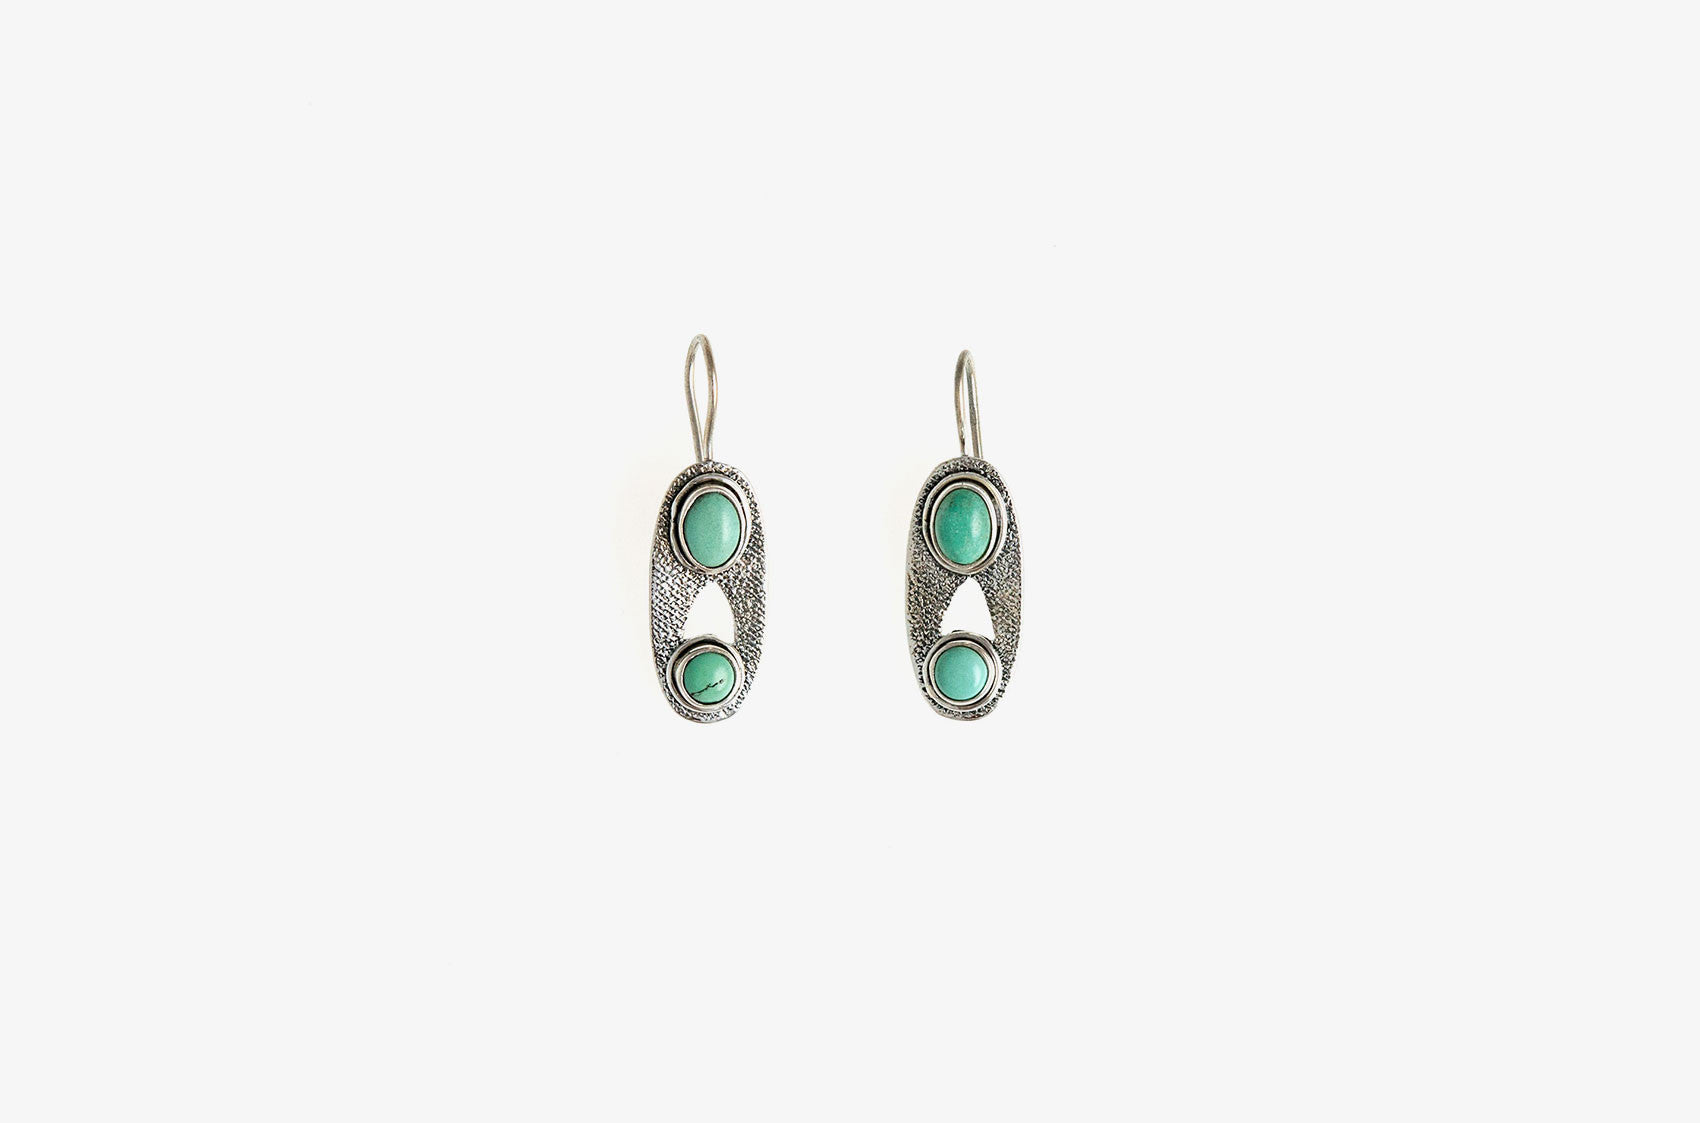 Silver & Stone. Oval turquoise earrings